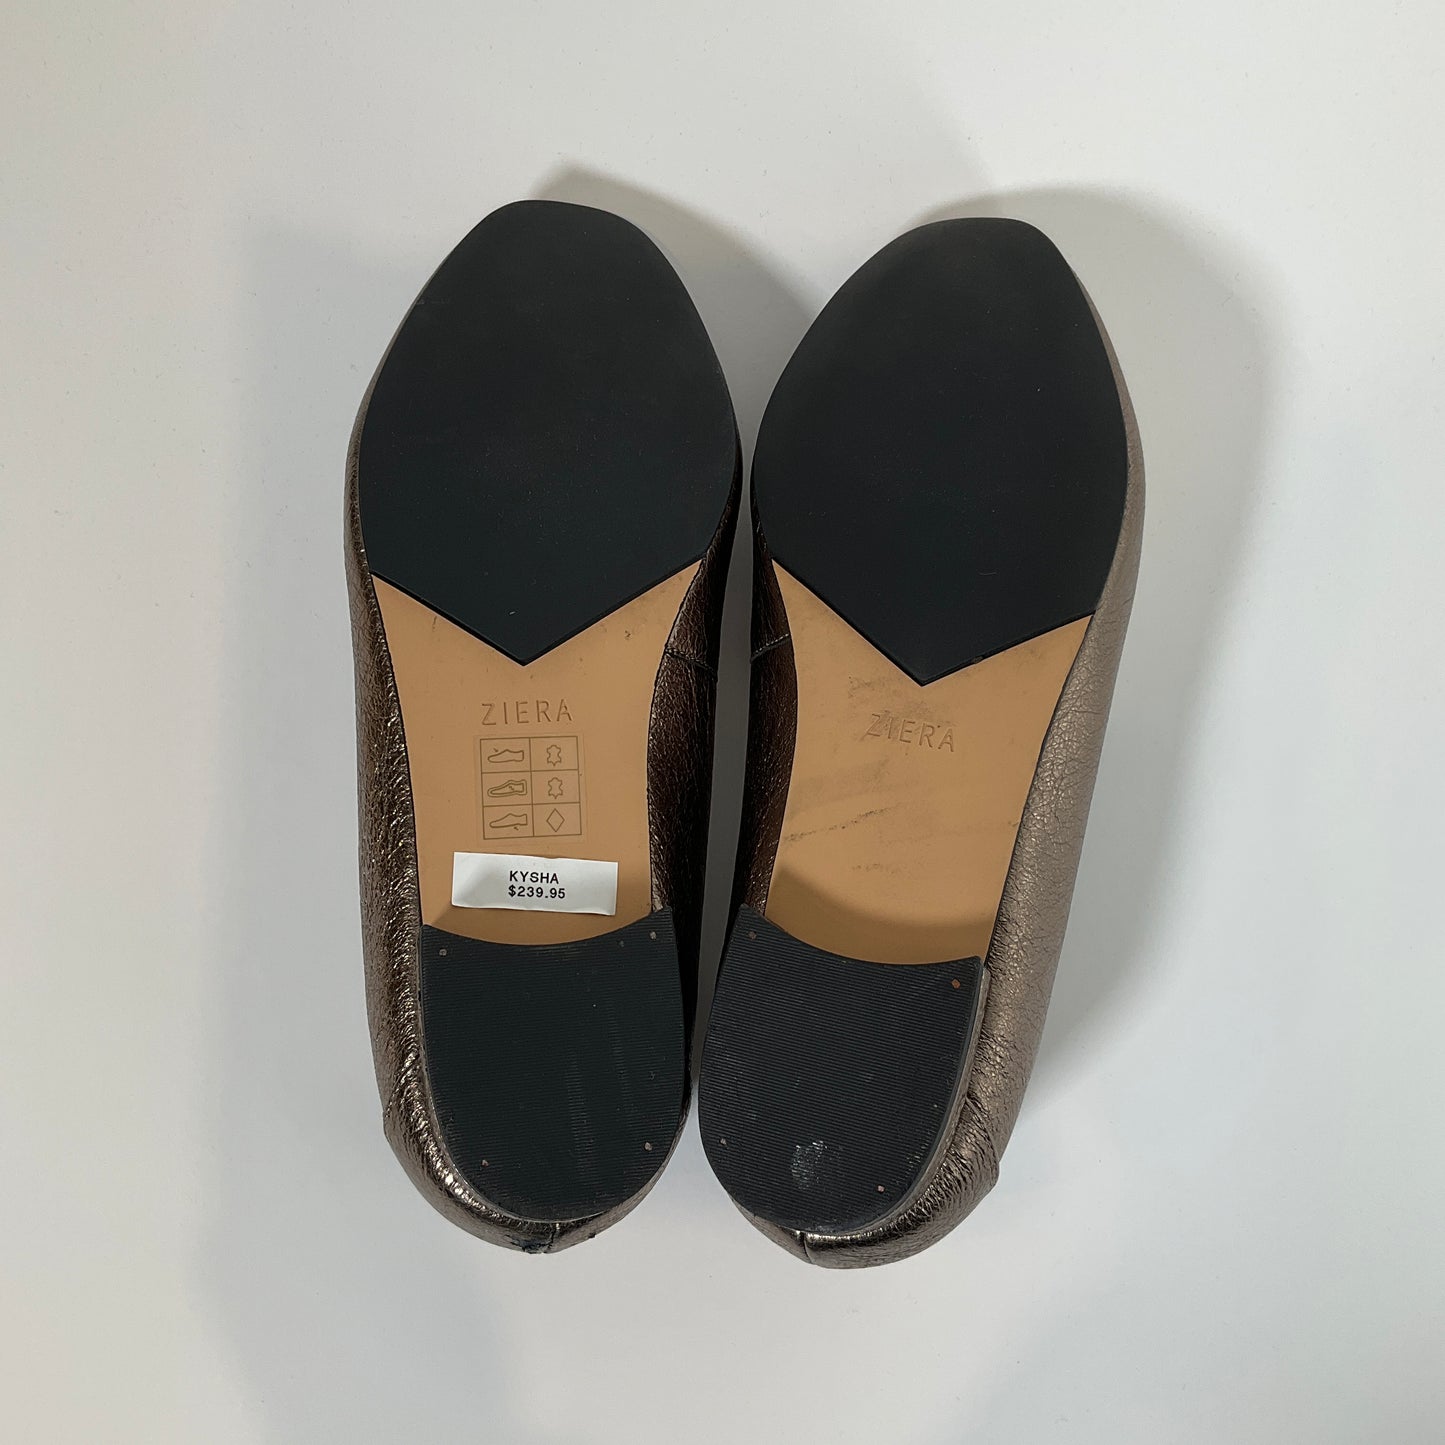 Ziera - Casual Shoes - Size 39